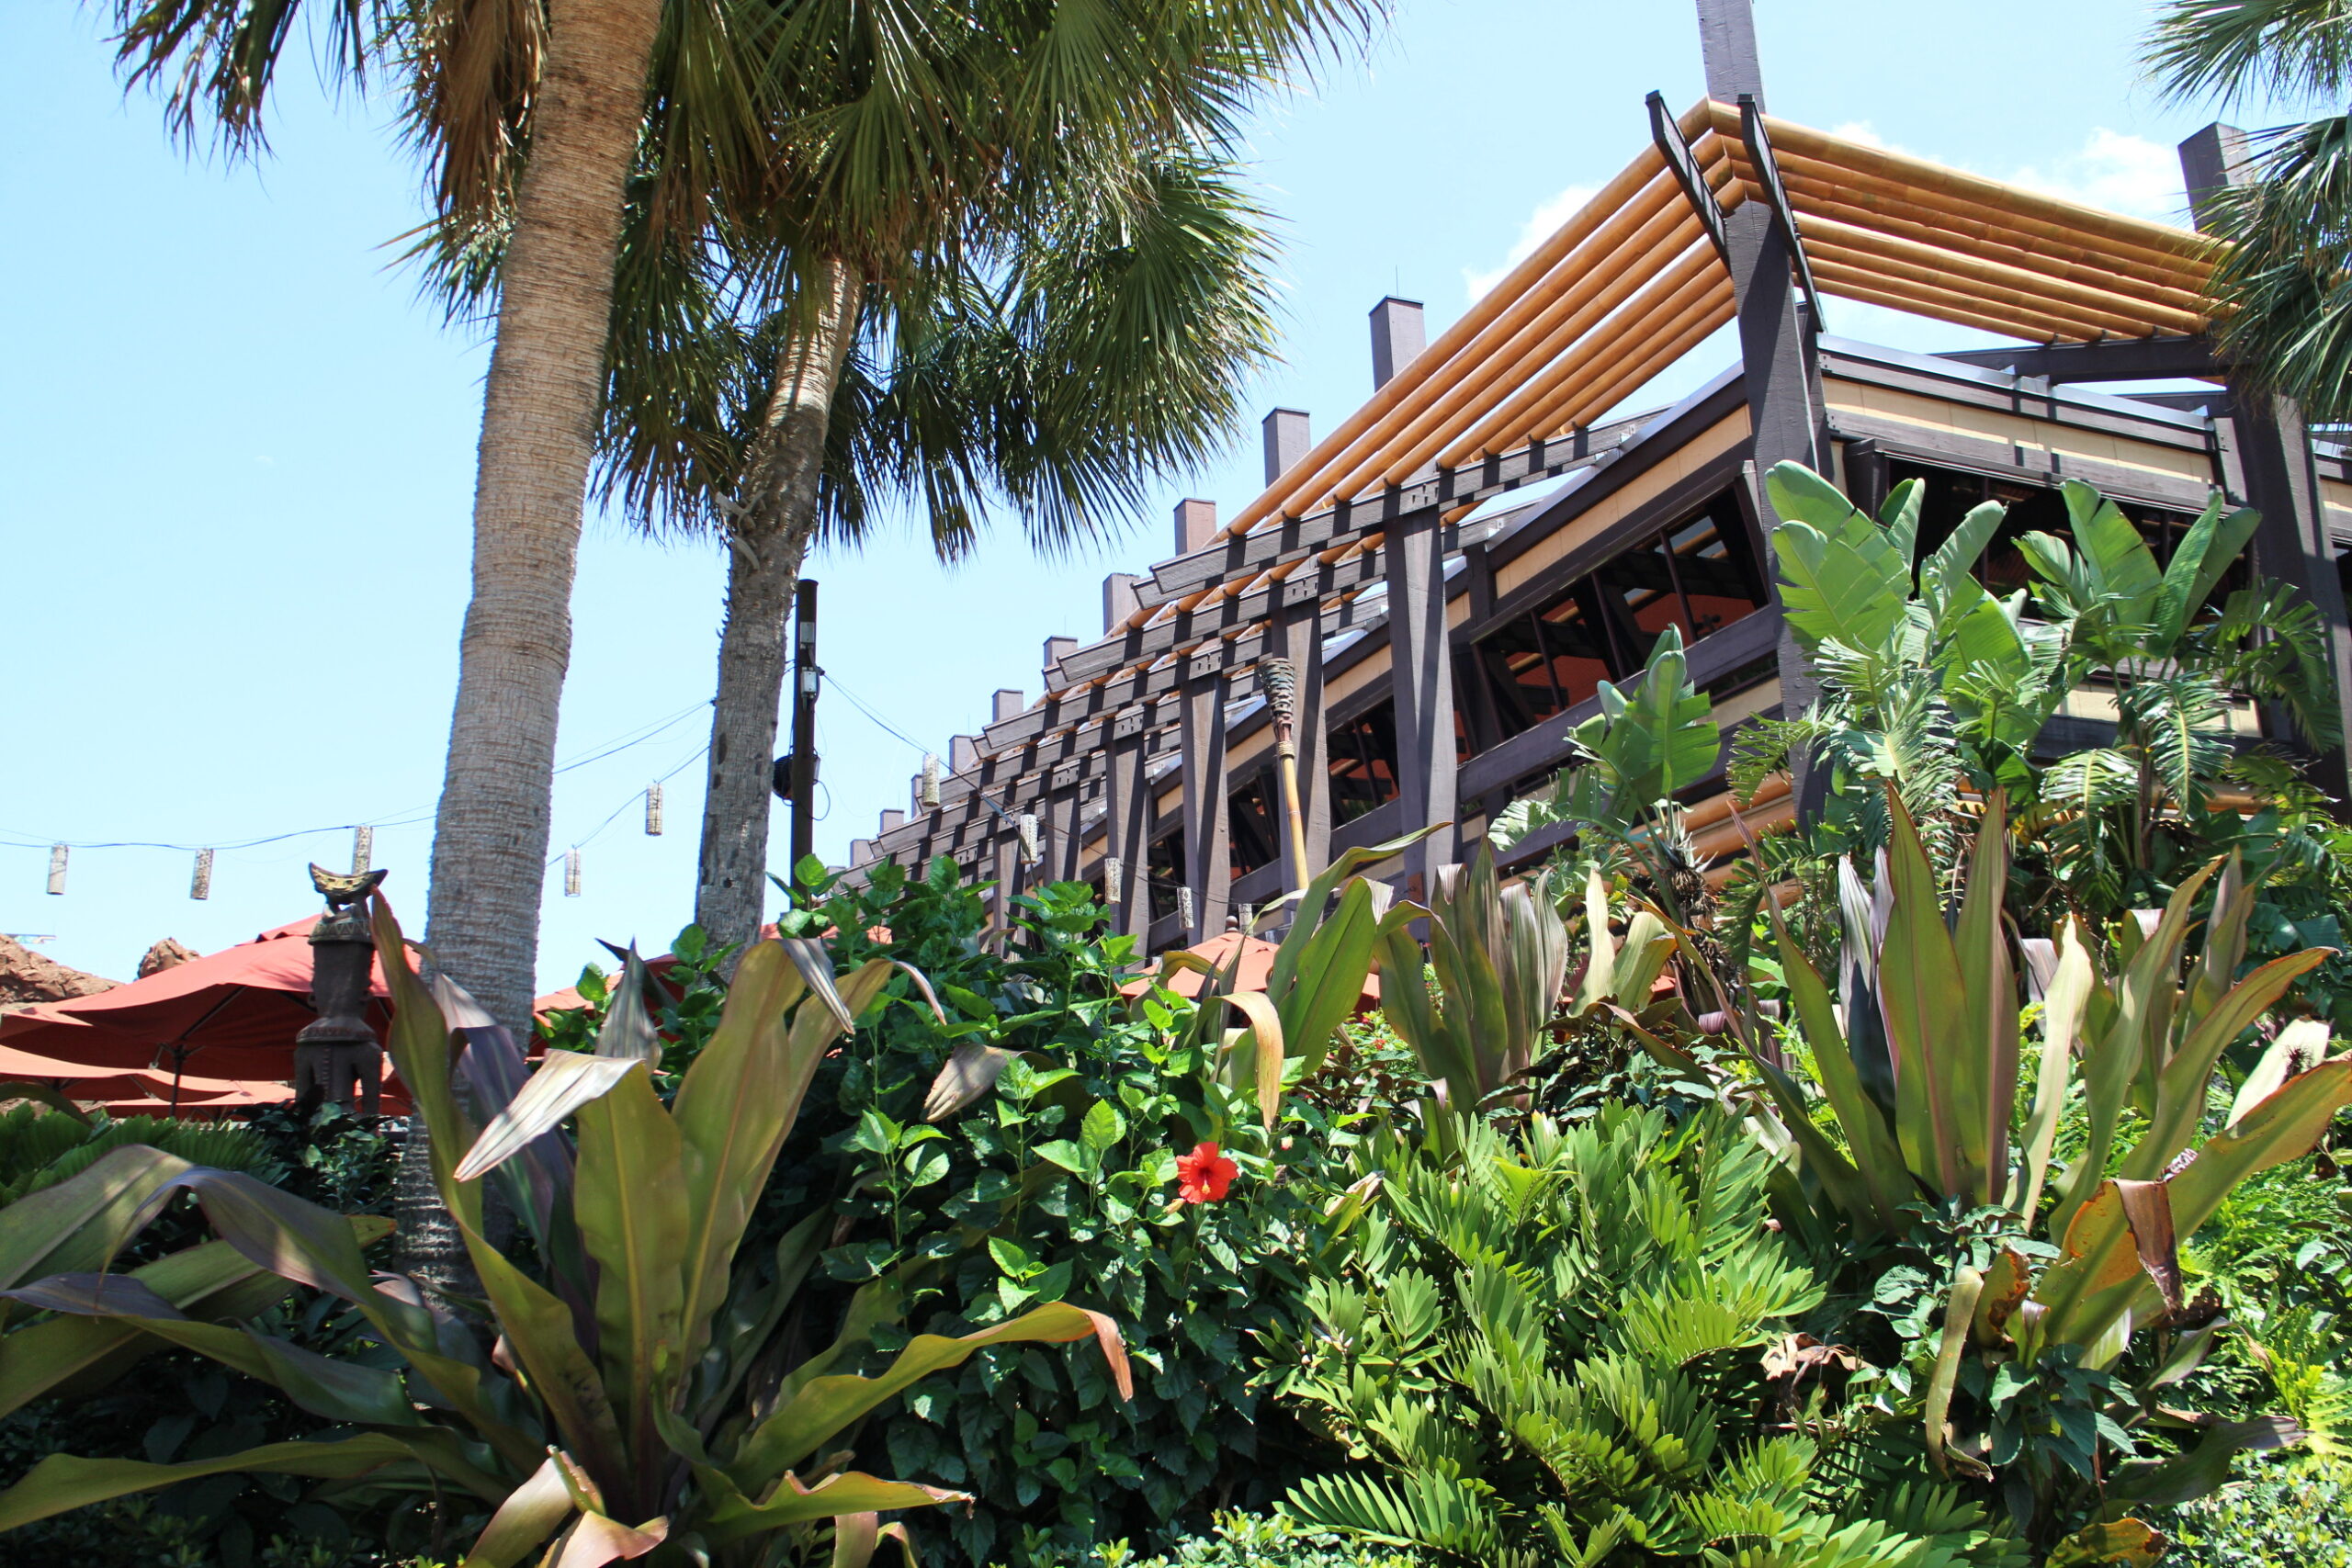 Polynesian resort tropical landscaping in front of a brown two story resort building with external support columns.